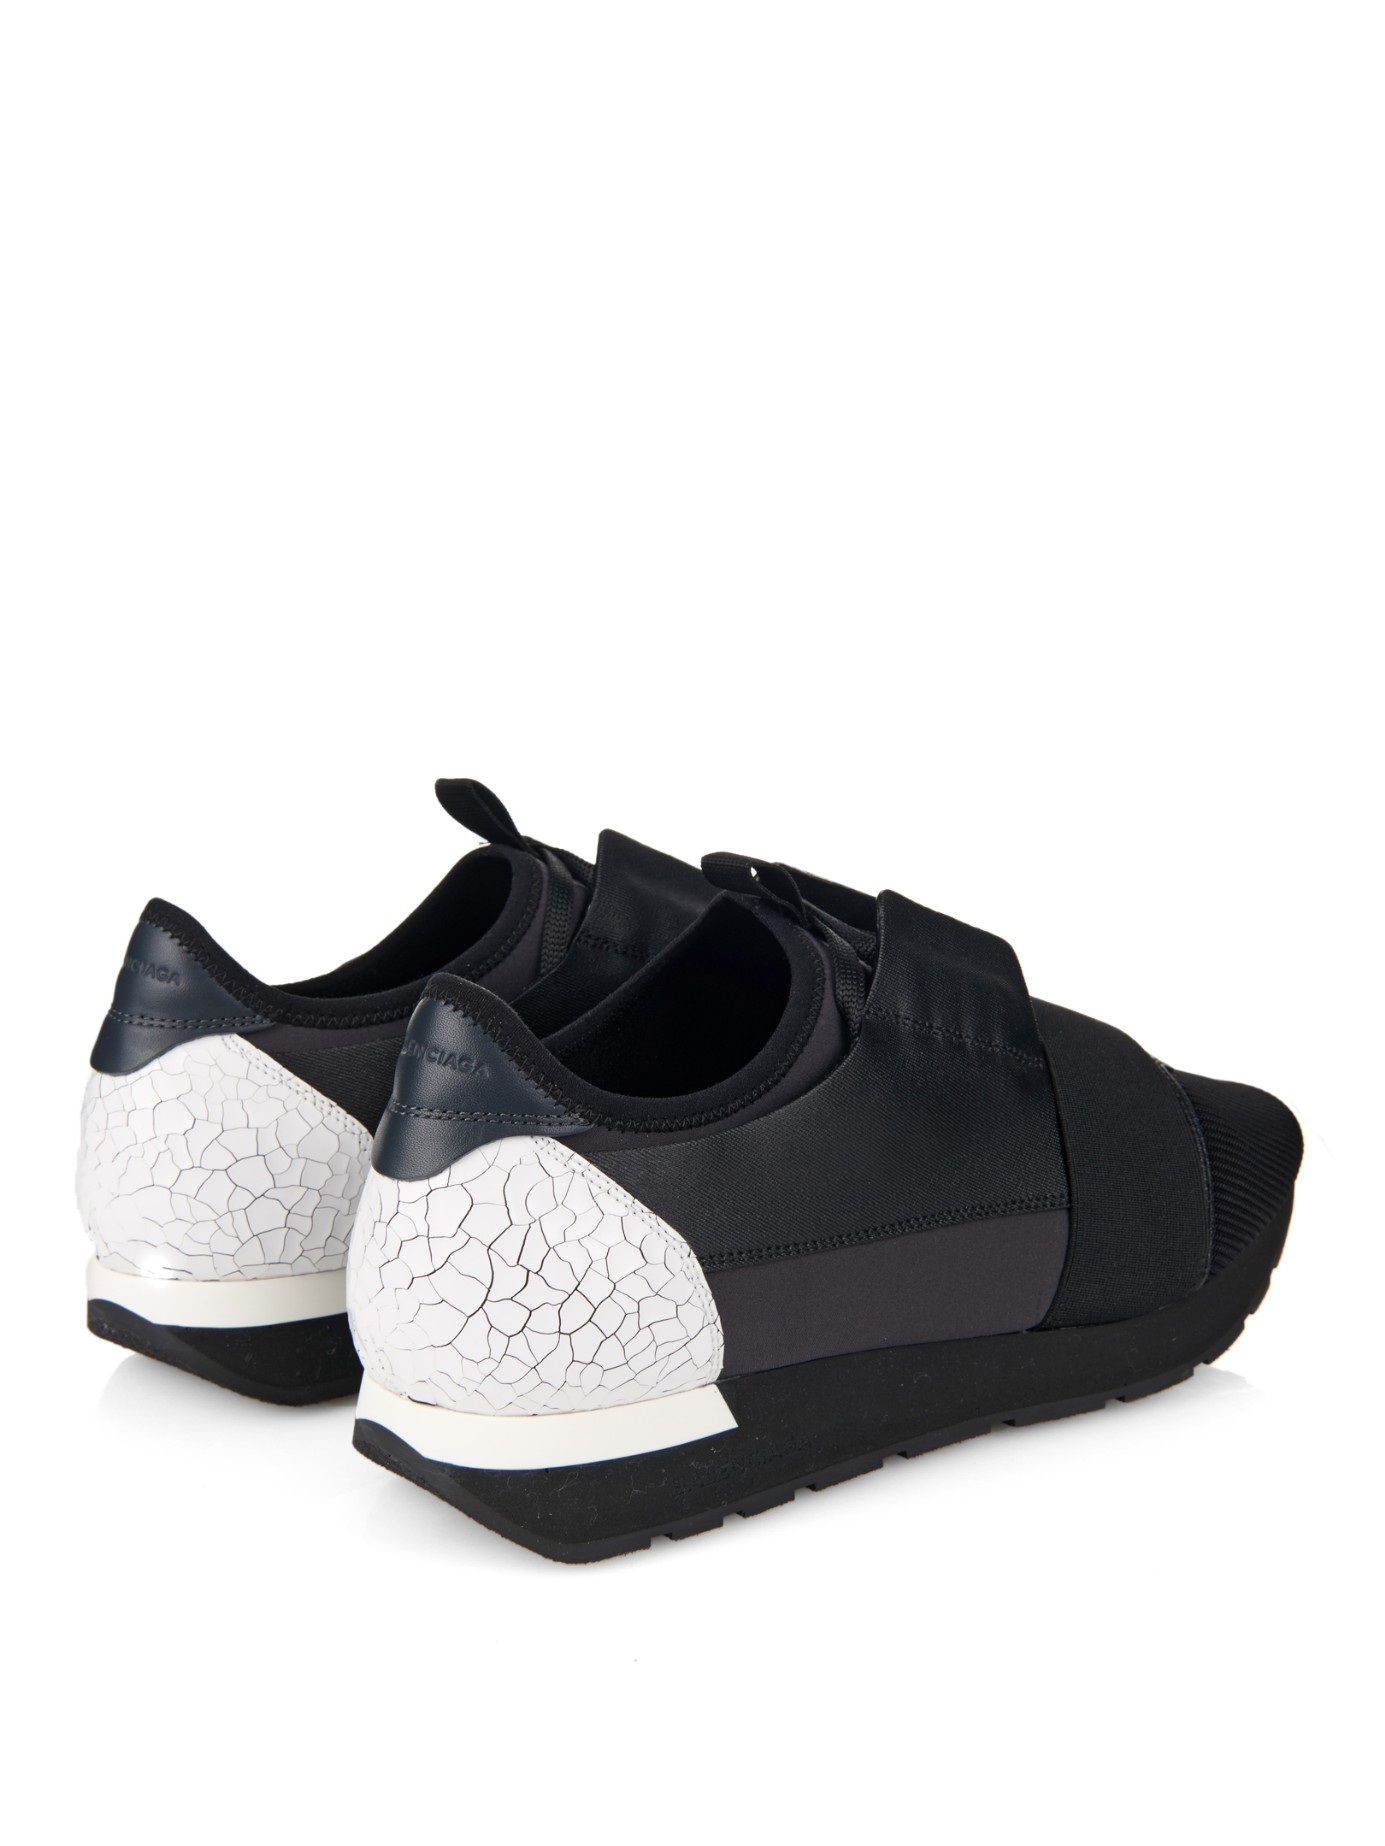 Balenciaga Leather Low-Top Trainers in Black White (Black) for Men - Lyst